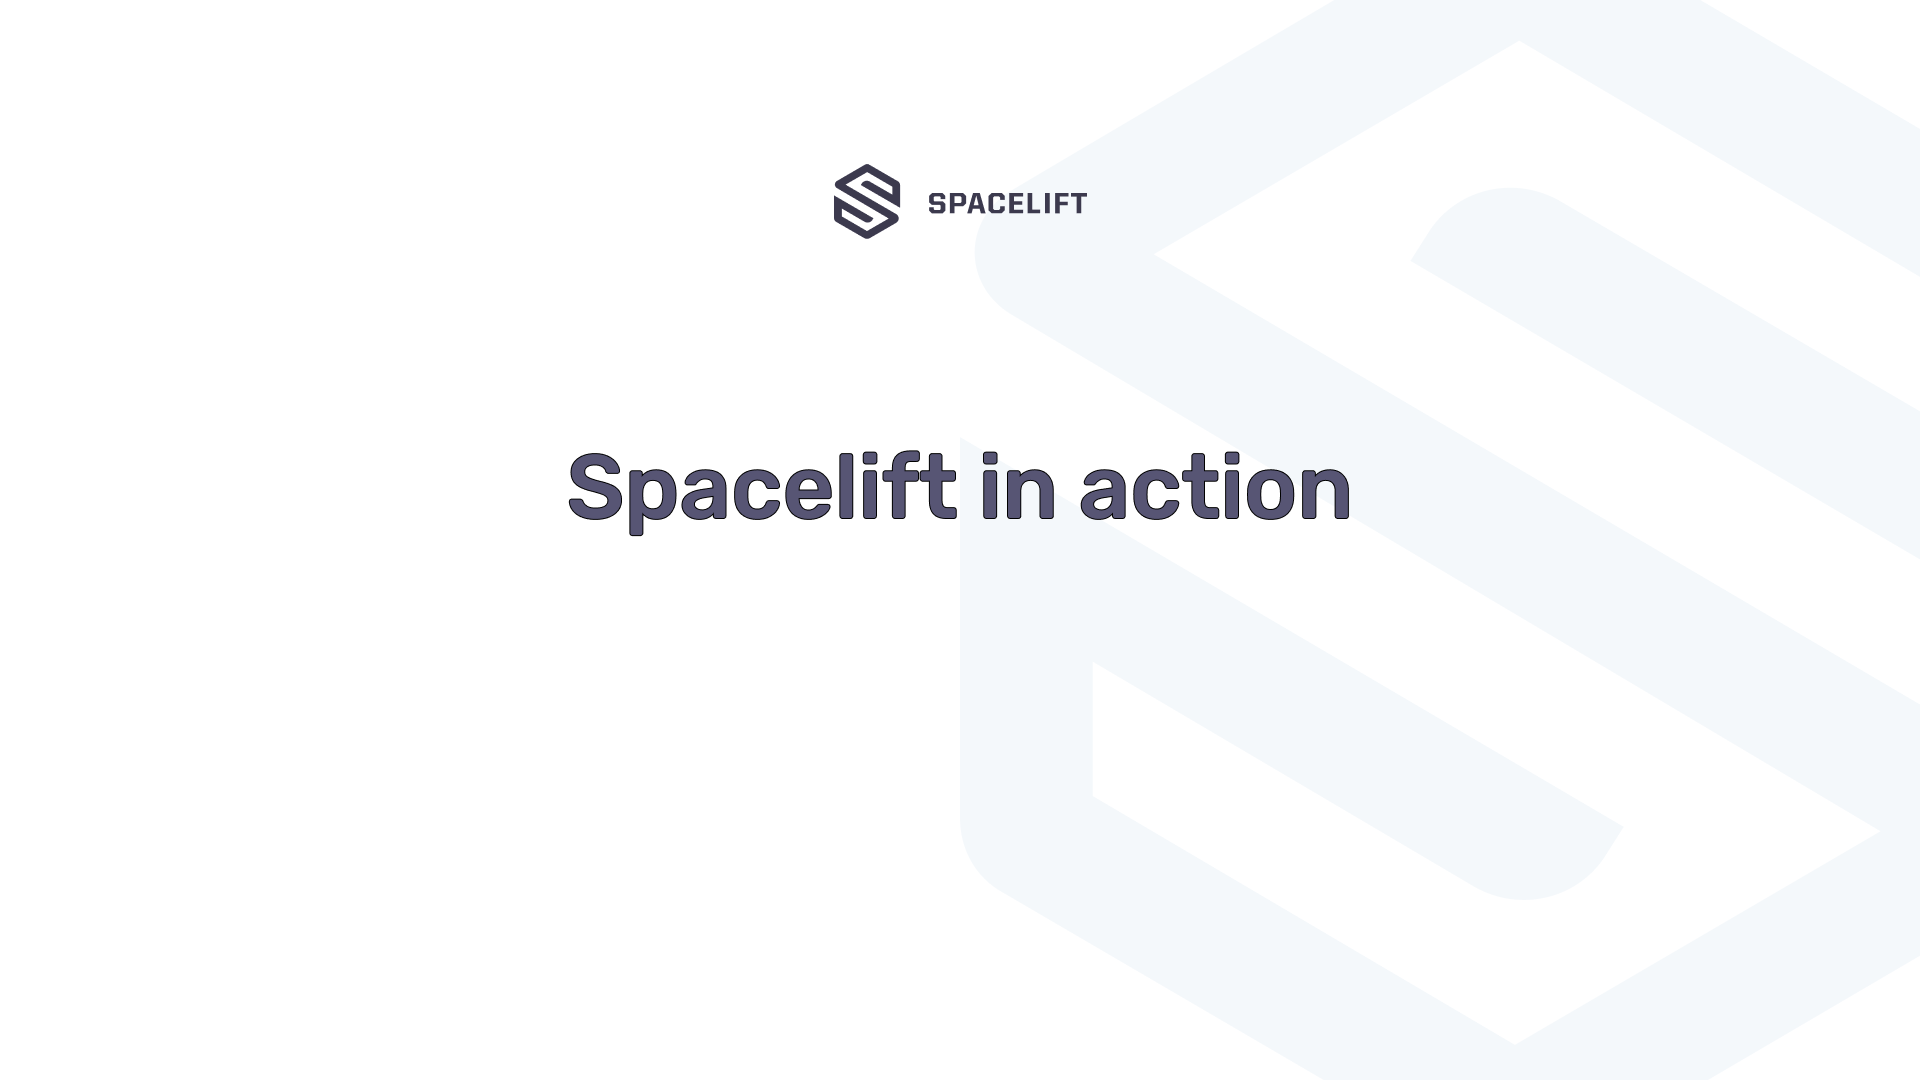 Spacelift in action